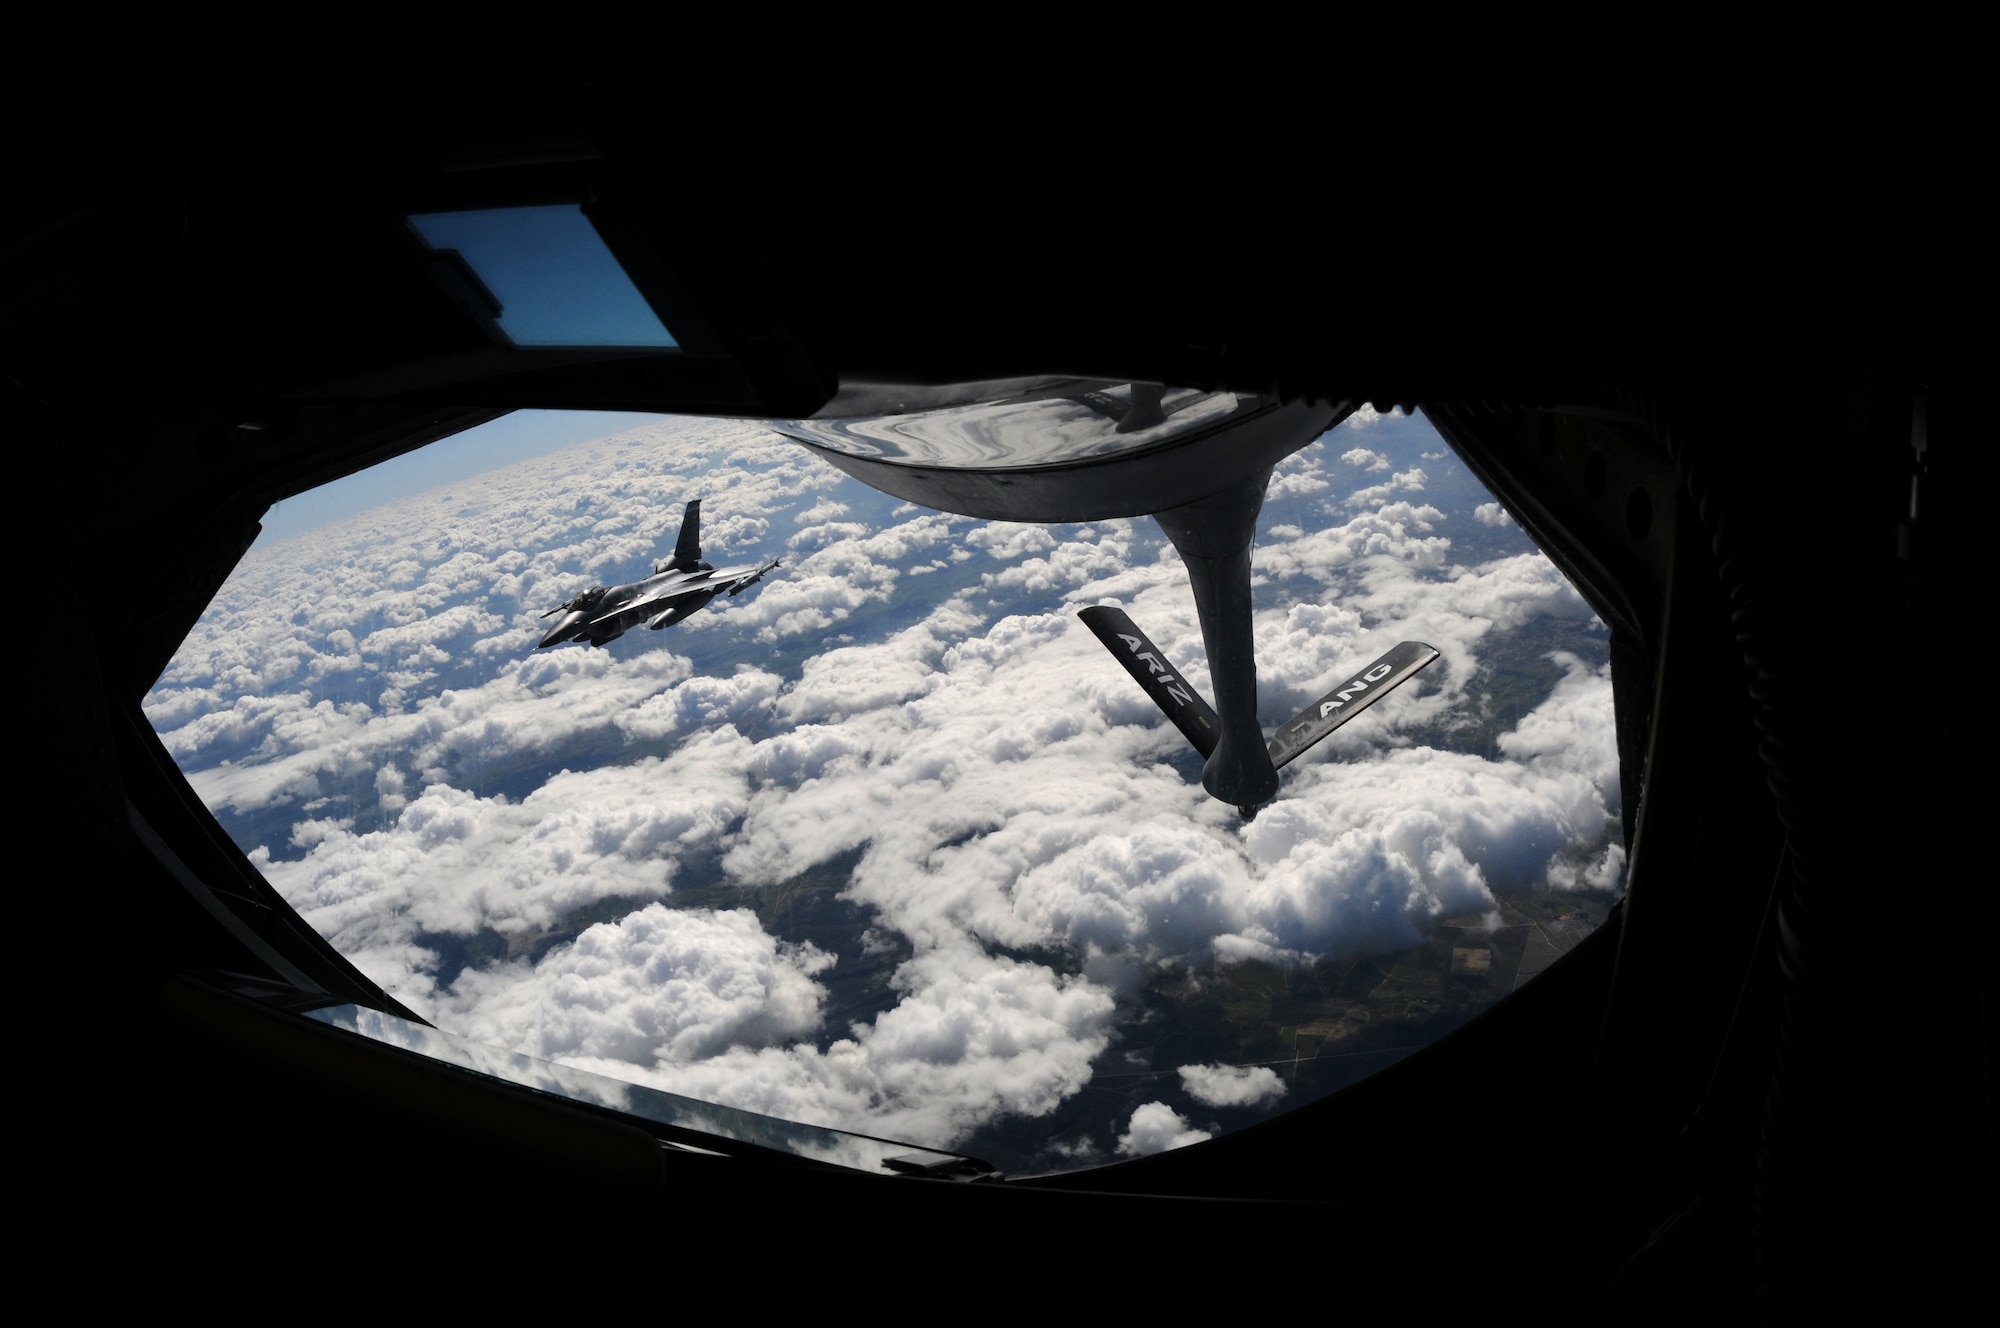 A U.S. Air Force F-16 Fighting Falcon from the 140th Fighter Wing, Buckley, Colo., approaches the boom of a KC-135 Stratotanker from the 161st Air Refueling Wing, Phoenix, Ariz., November 12, 2010, near Natal, Brazil. Both wings are participating CRUZEX V, or Cruzeiro Do Sul (Southern Cross).  CRUZEX is a multi-national combined exercise involving the Air Forces of Argentina, Brazil, Chile, France and Uruguay, and observers from numerous other countries with more than 82 aircraft and almost 3,000 Airmen involved.  U.S. Air Force Photo by Master Sgt. Kelly M. Deitloff